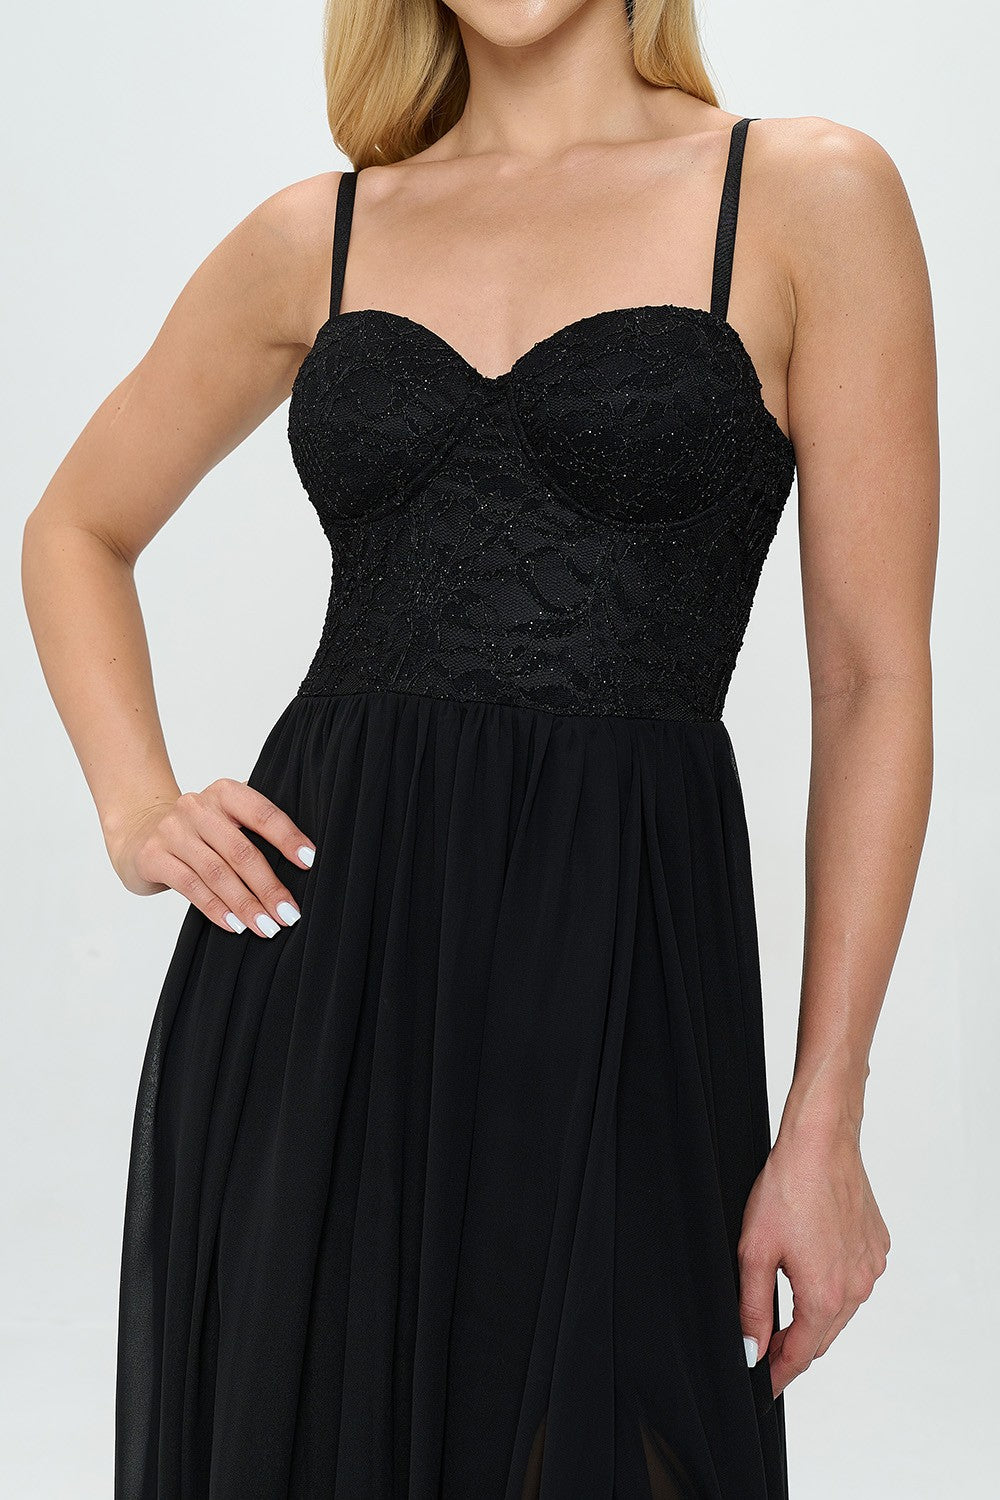 LACE DETAIL BUSTIER BODICE FLOOR LENGTH SLITTED DRESS